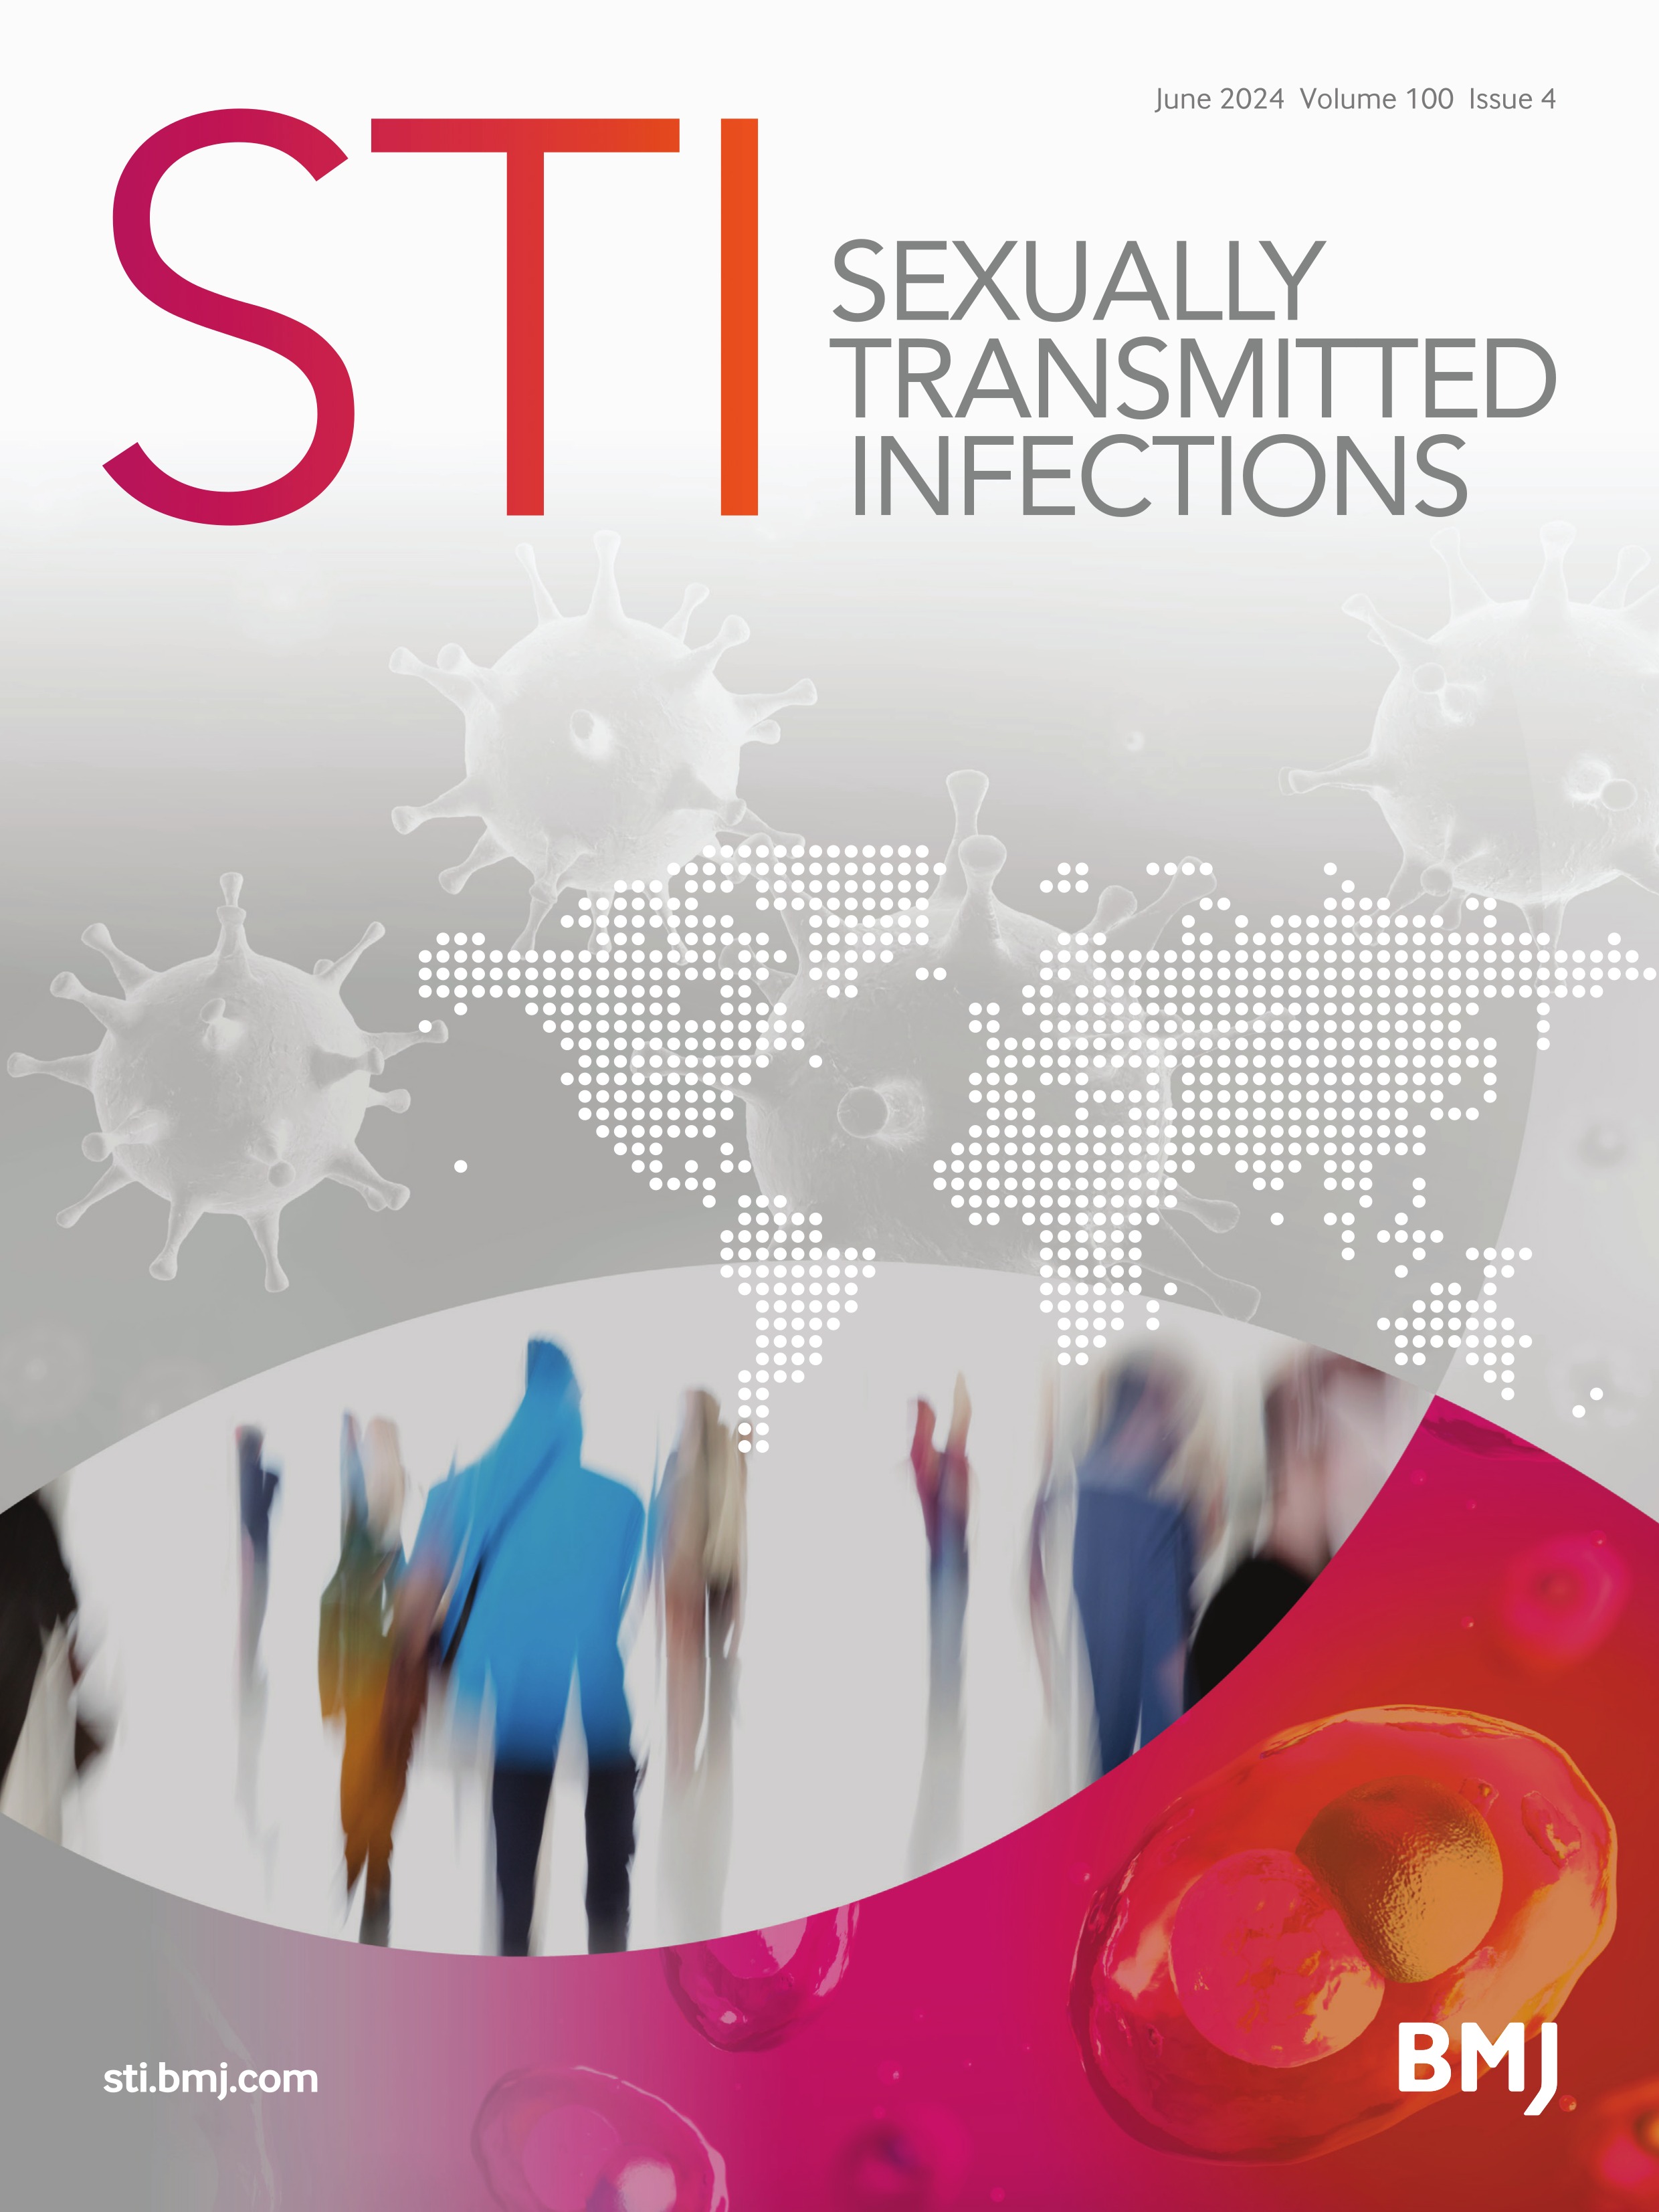 Digital interventions for STI and HIV partner notification: a scoping review